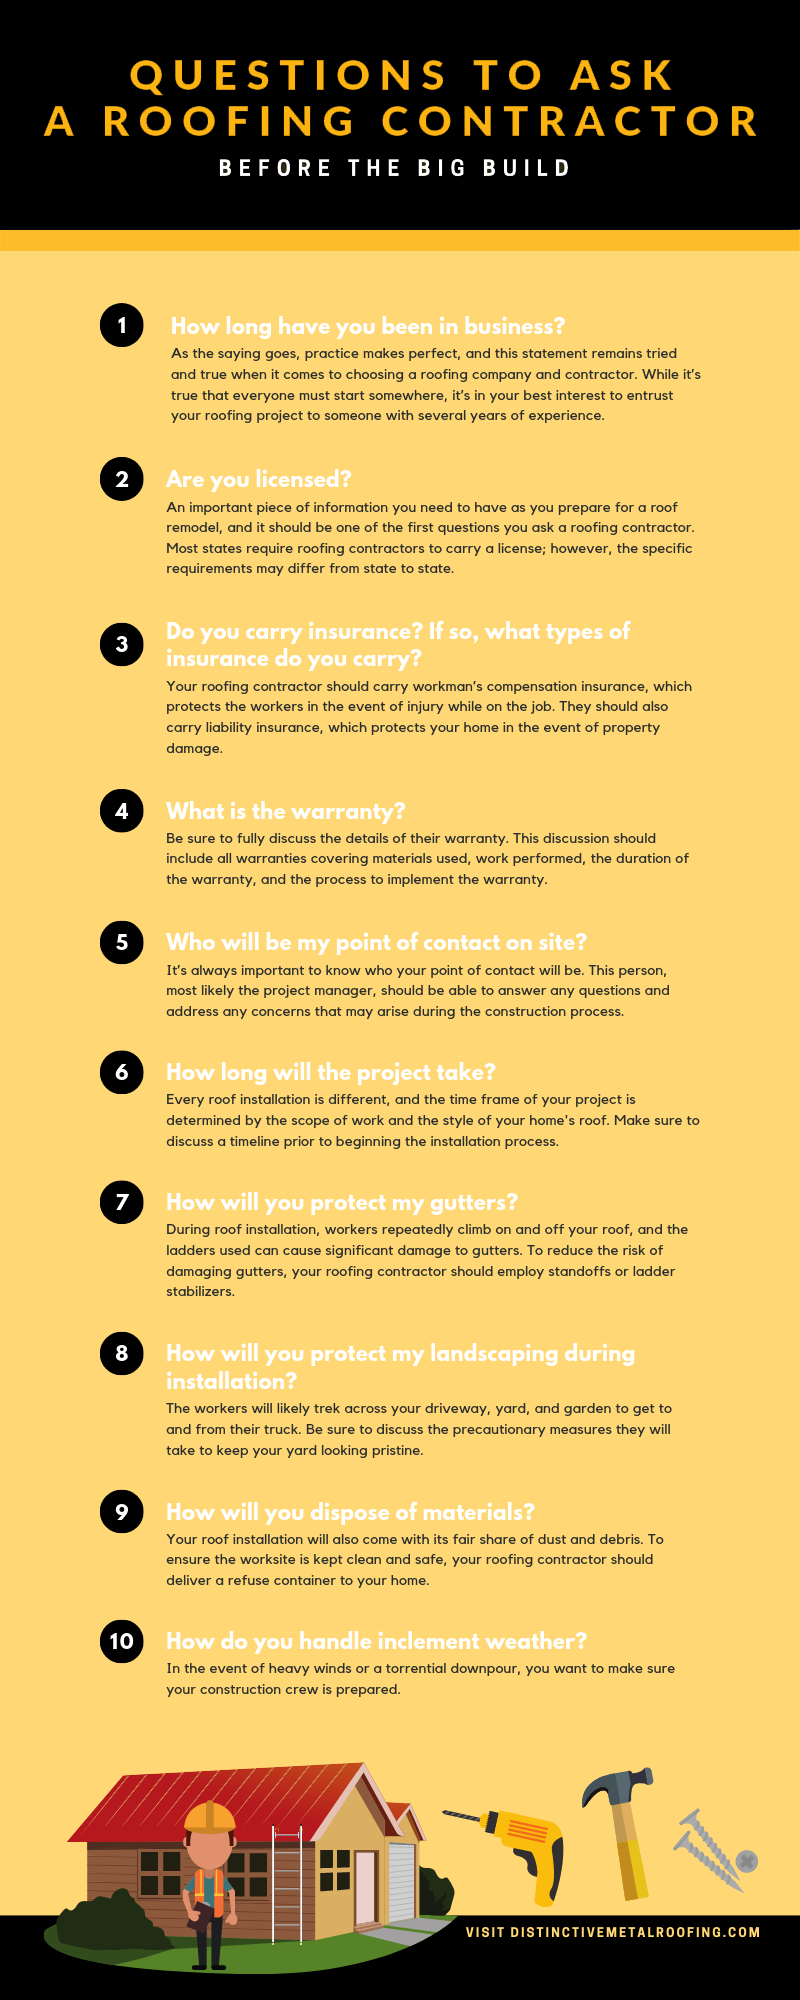 Questions to Ask a Roofing Contractor Before the Big Build infographic